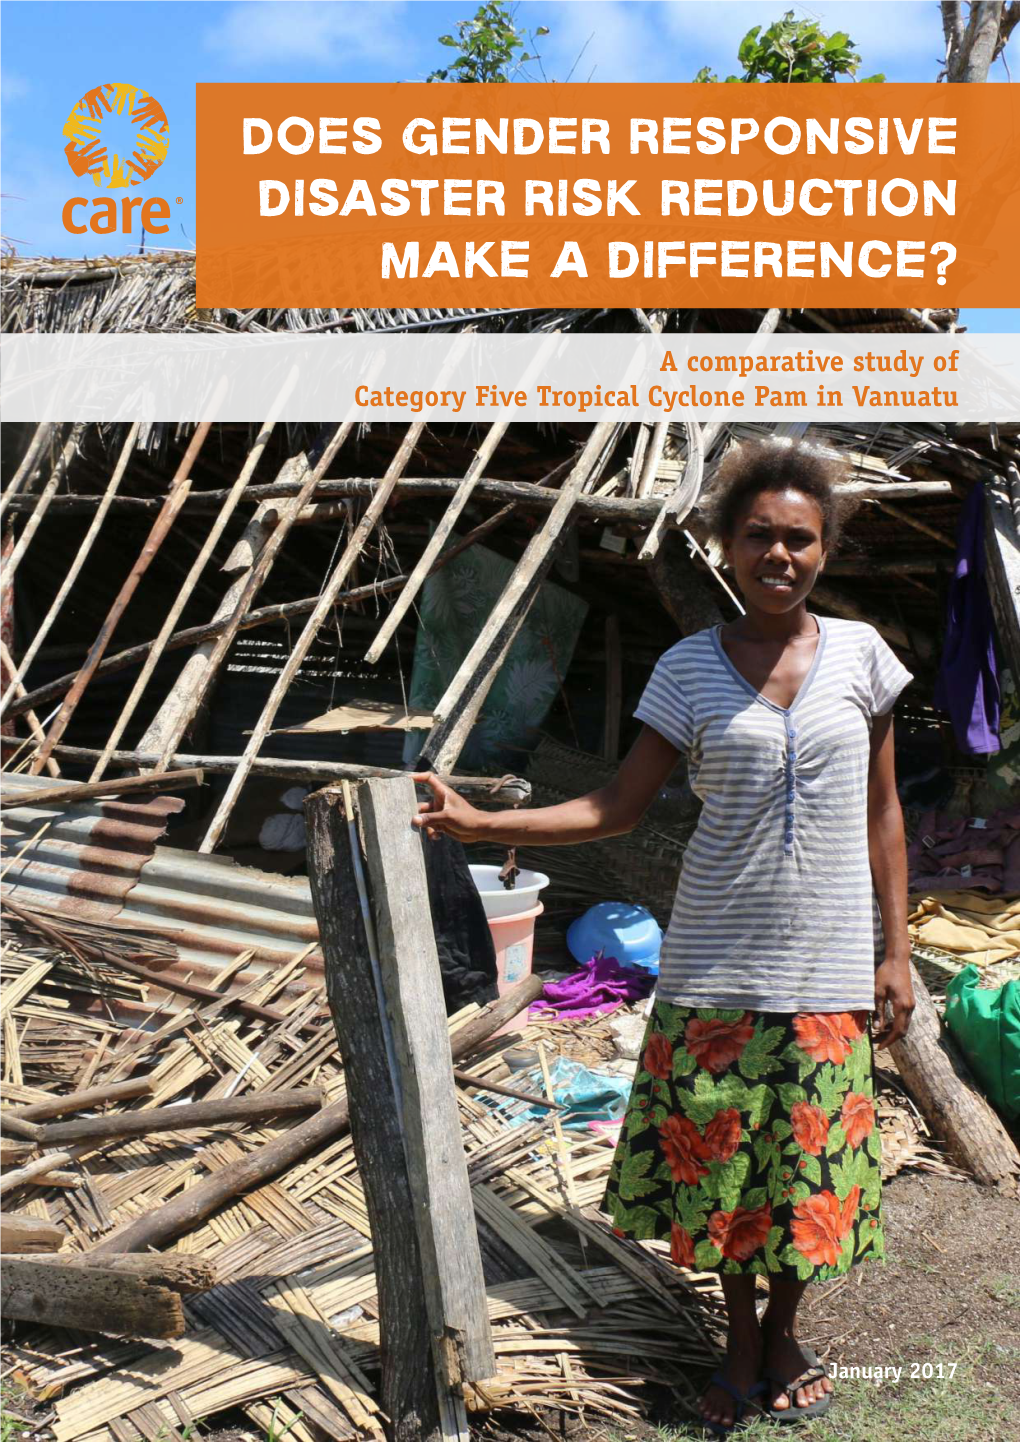 Does Gender Responsive Disaster Risk Reduction Make a Difference?